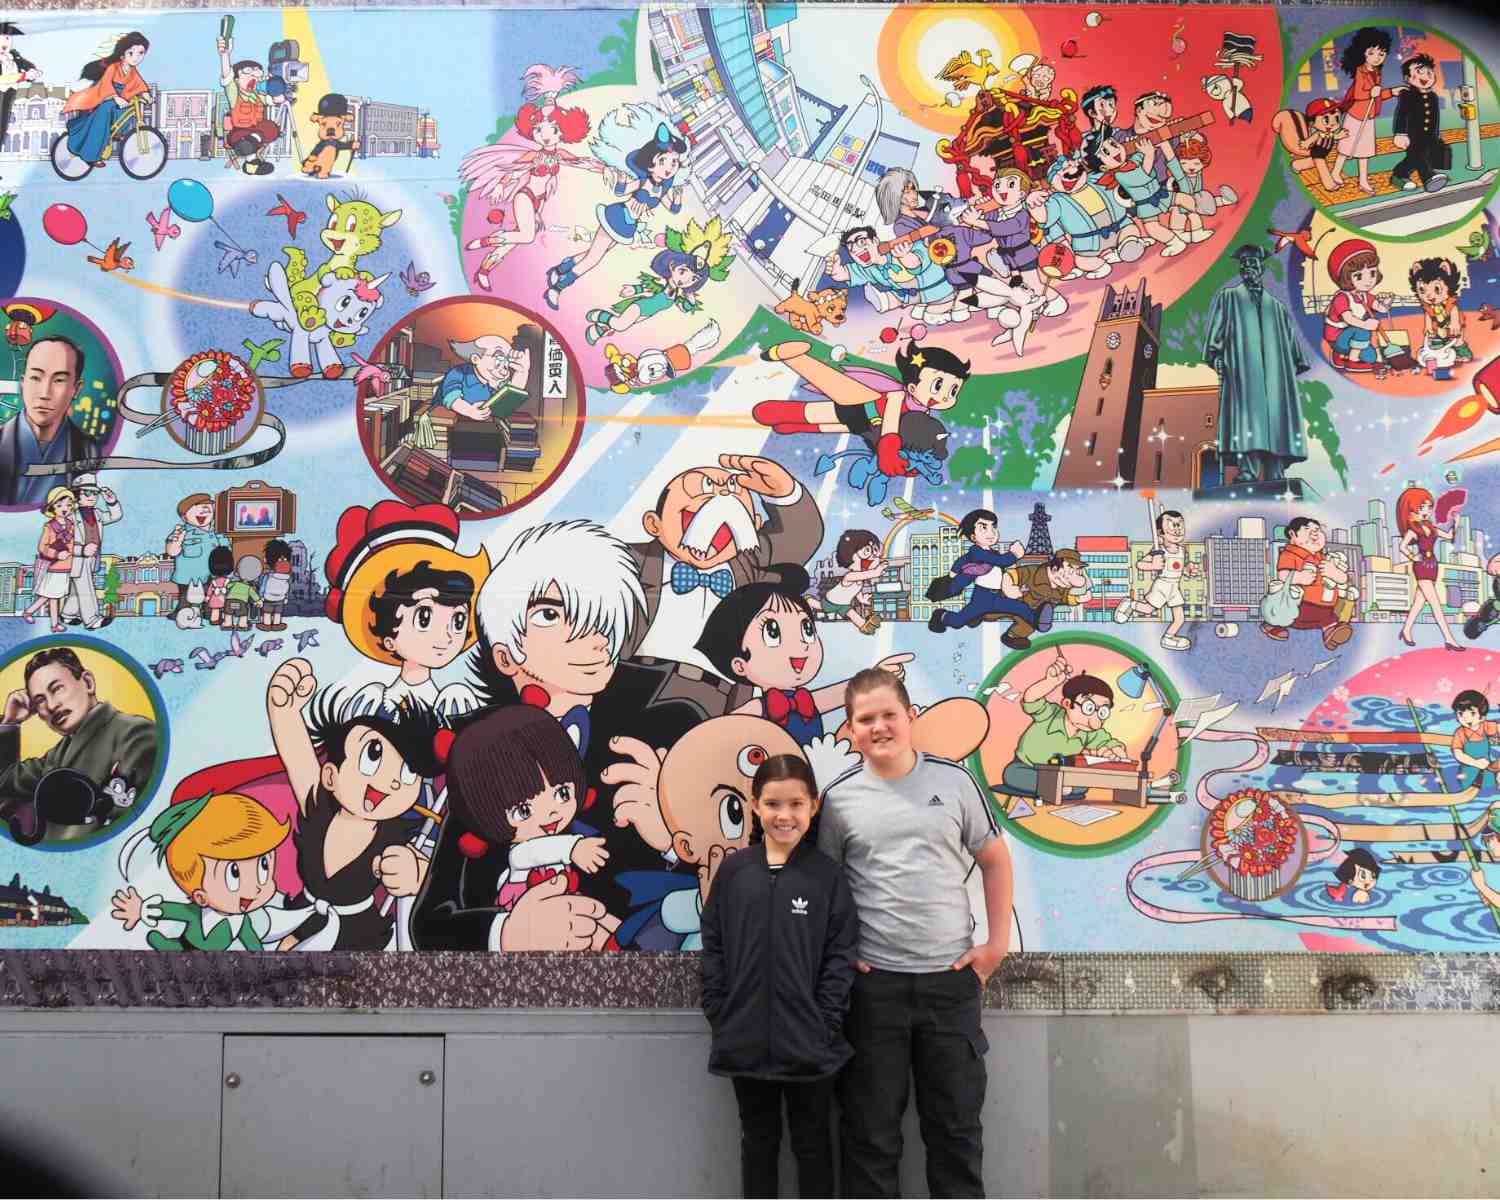 The mural in Takadanobaba Japan is dedicated to Astro Boy